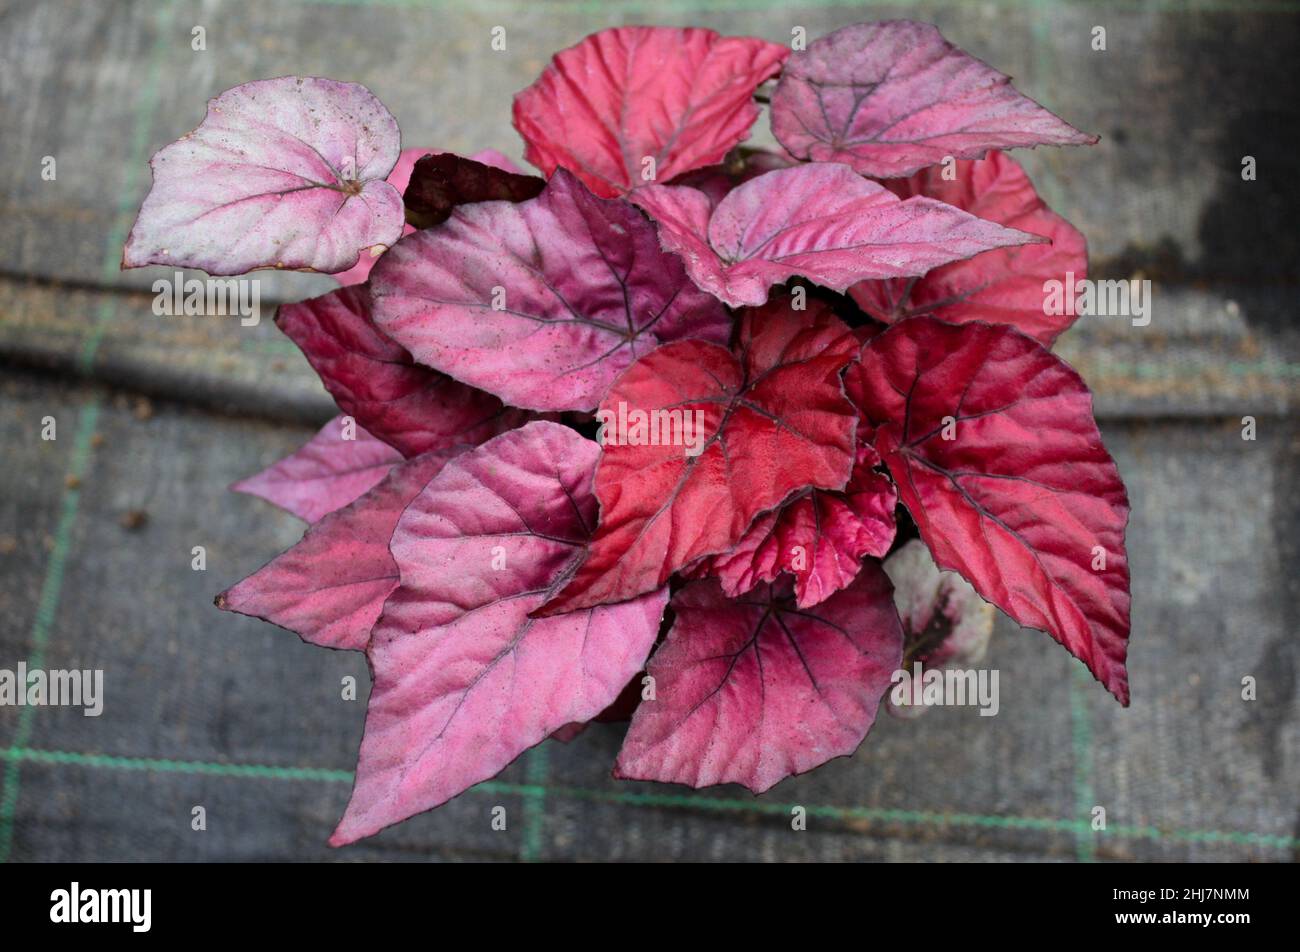 A begonia plant with dark pink variegated leaves in a pot on a background of gray matting. Stock Photo